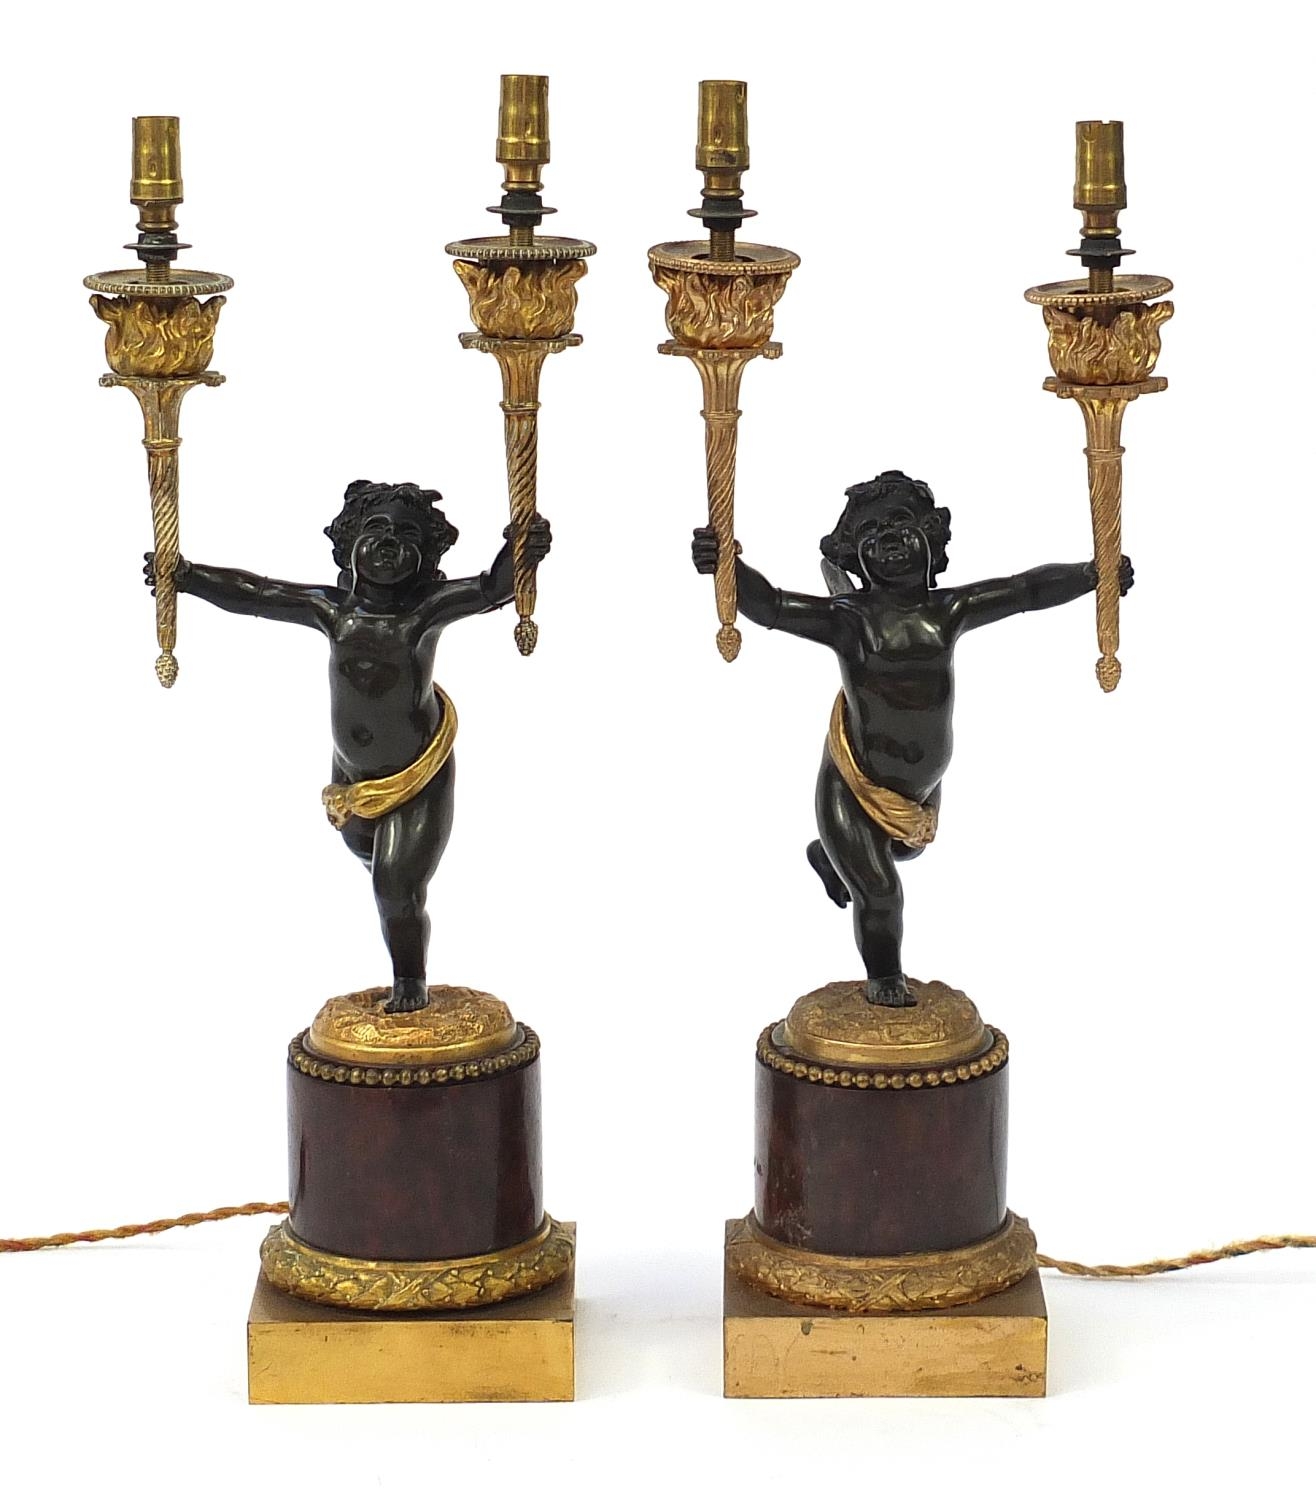 Pair of 19th century ormolu and marble Putti design two branch candelabras converted to electric - Image 2 of 7